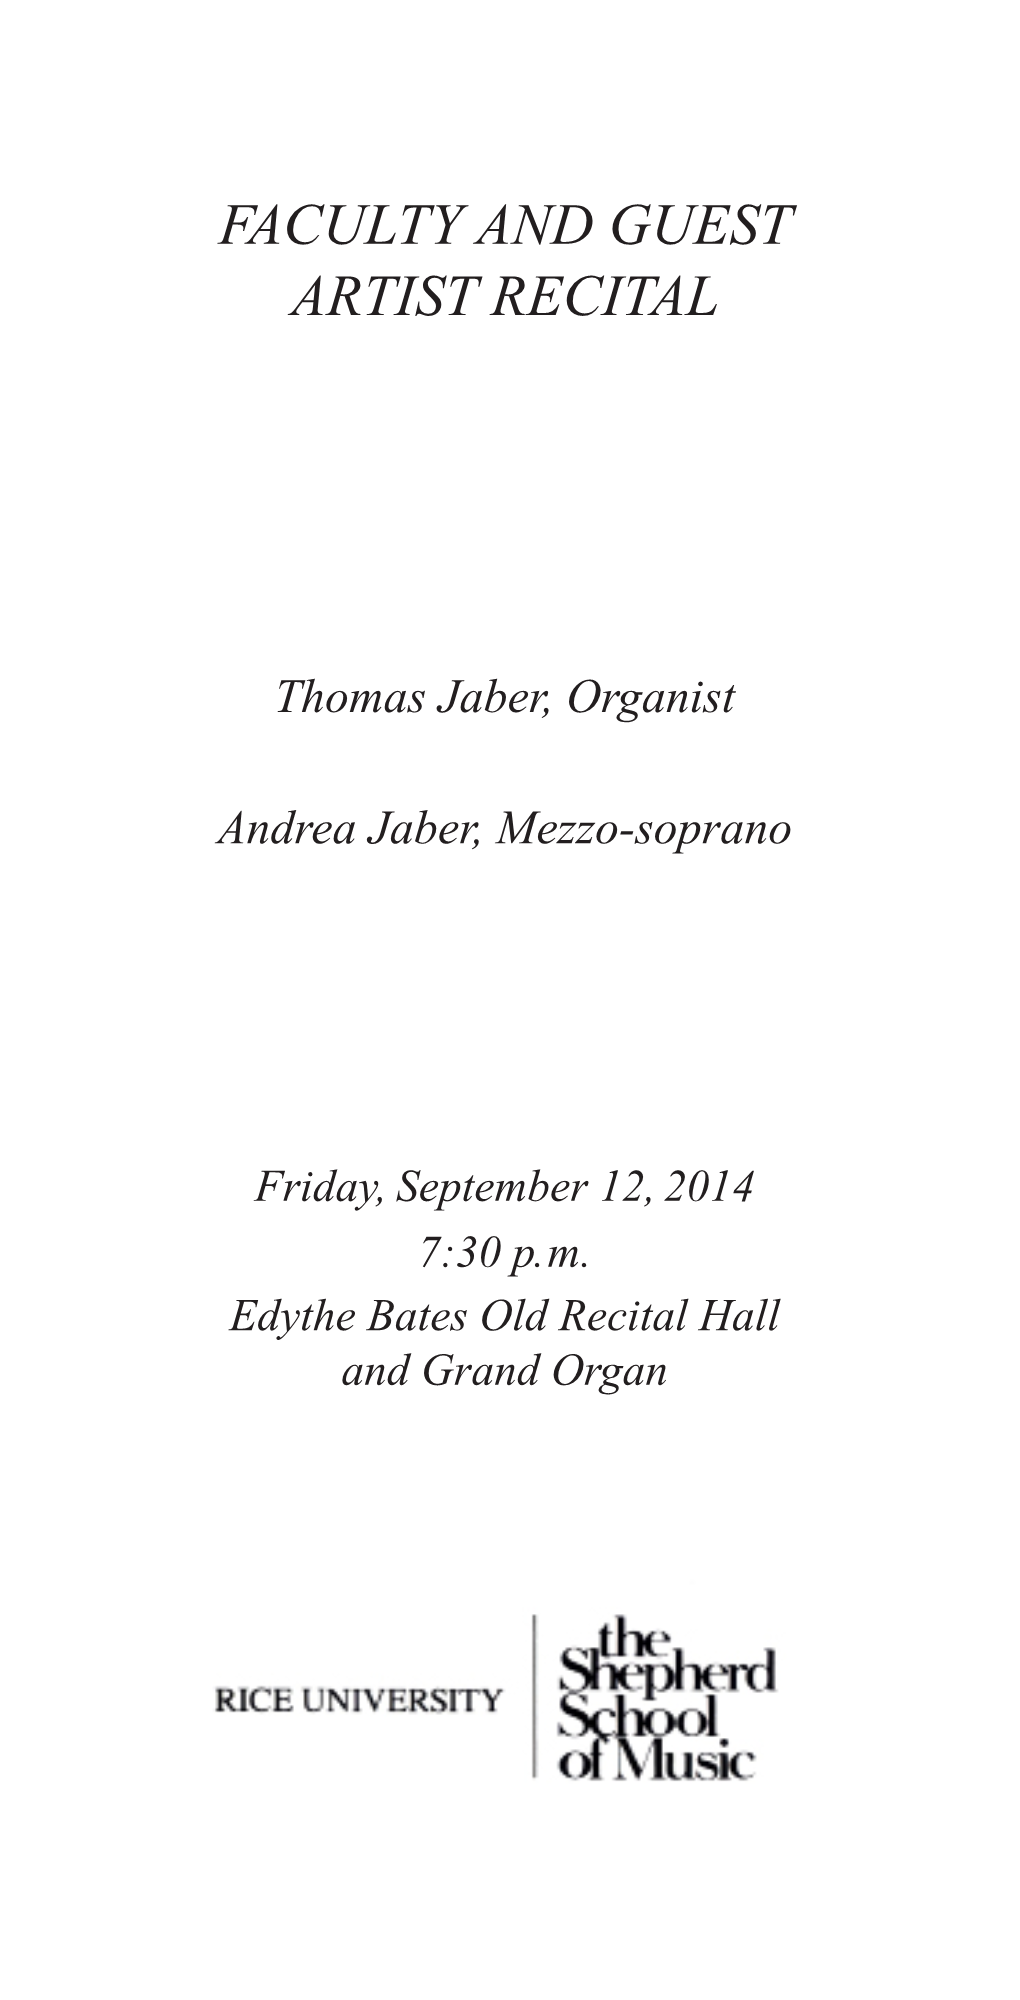 FACULTY and GUEST ARTIST RECITAL Thomas Jaber, Organist